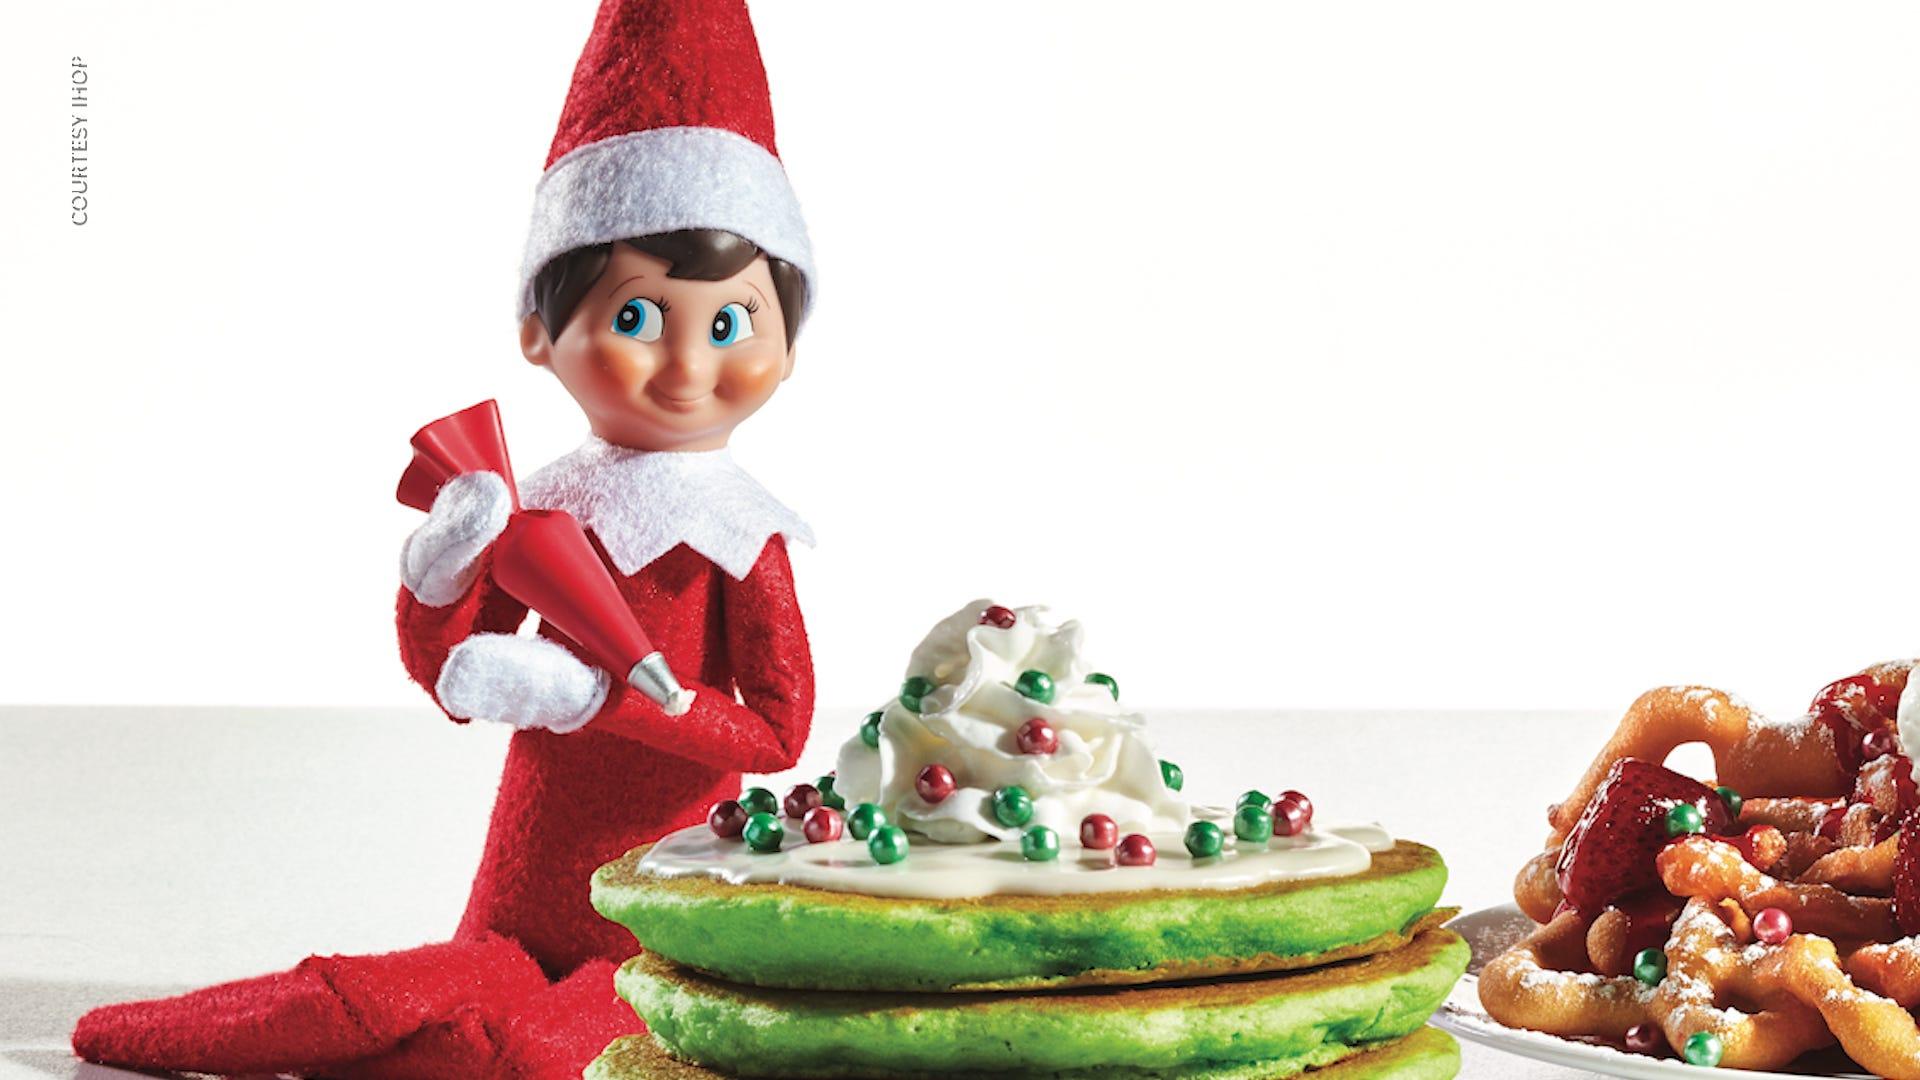 IHOP Partnered With Elf On The Shelf For A Holiday Inspired Menu